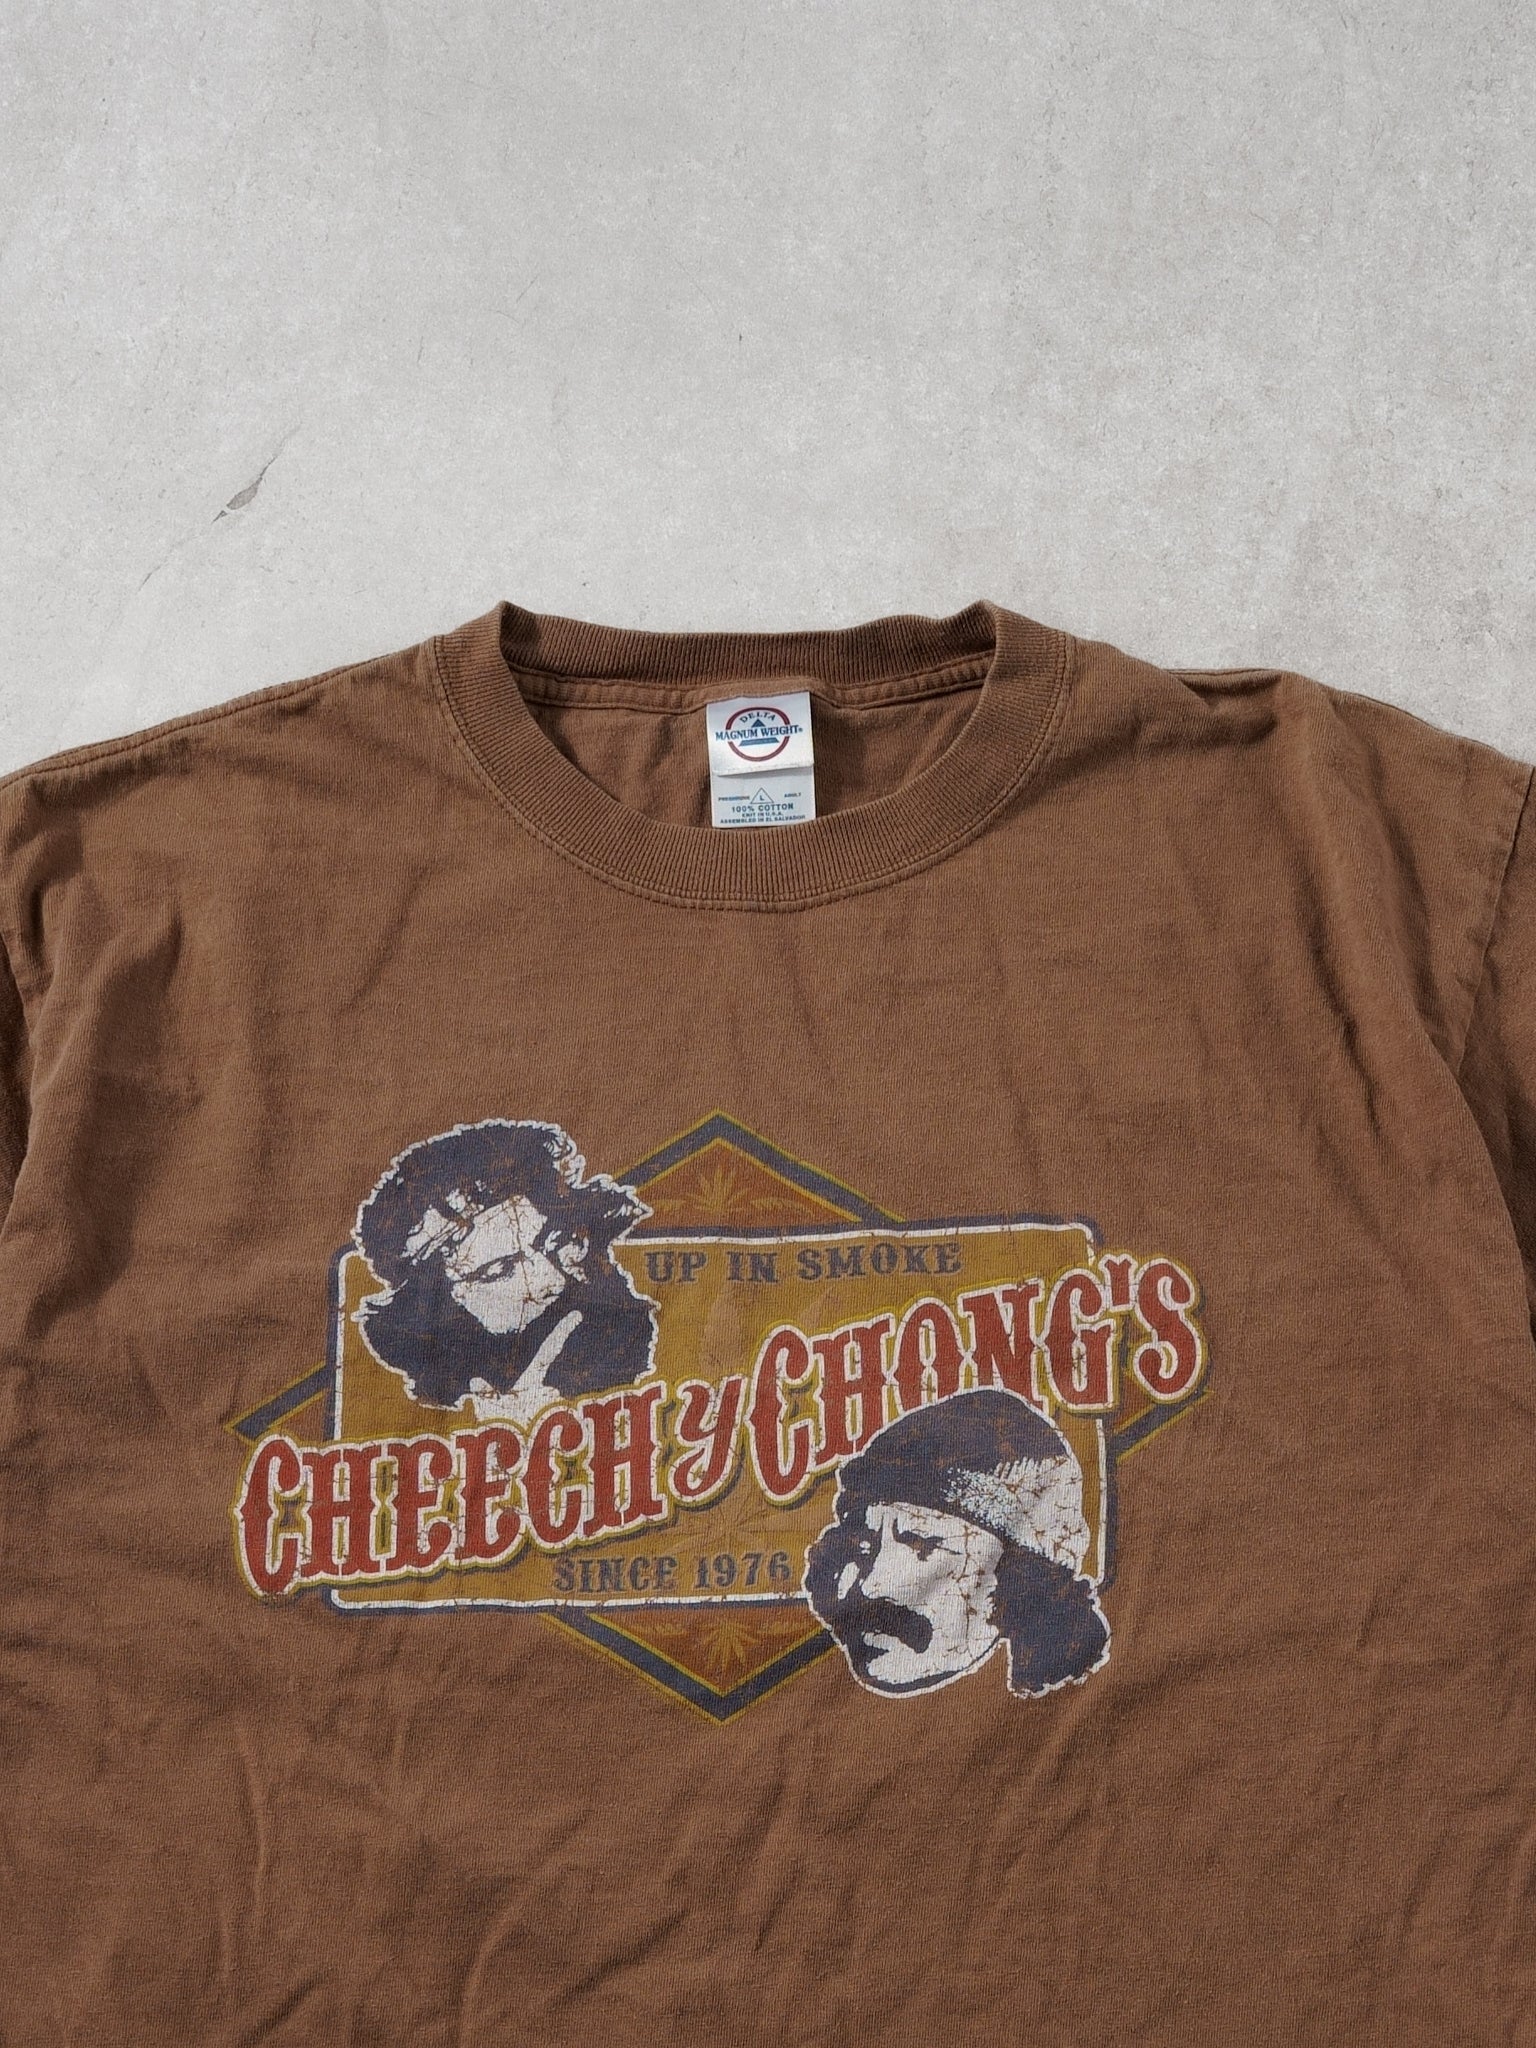 Vintage Y2k Brown Up In Smoke Cheechy Chong's Graphic Tee (M)